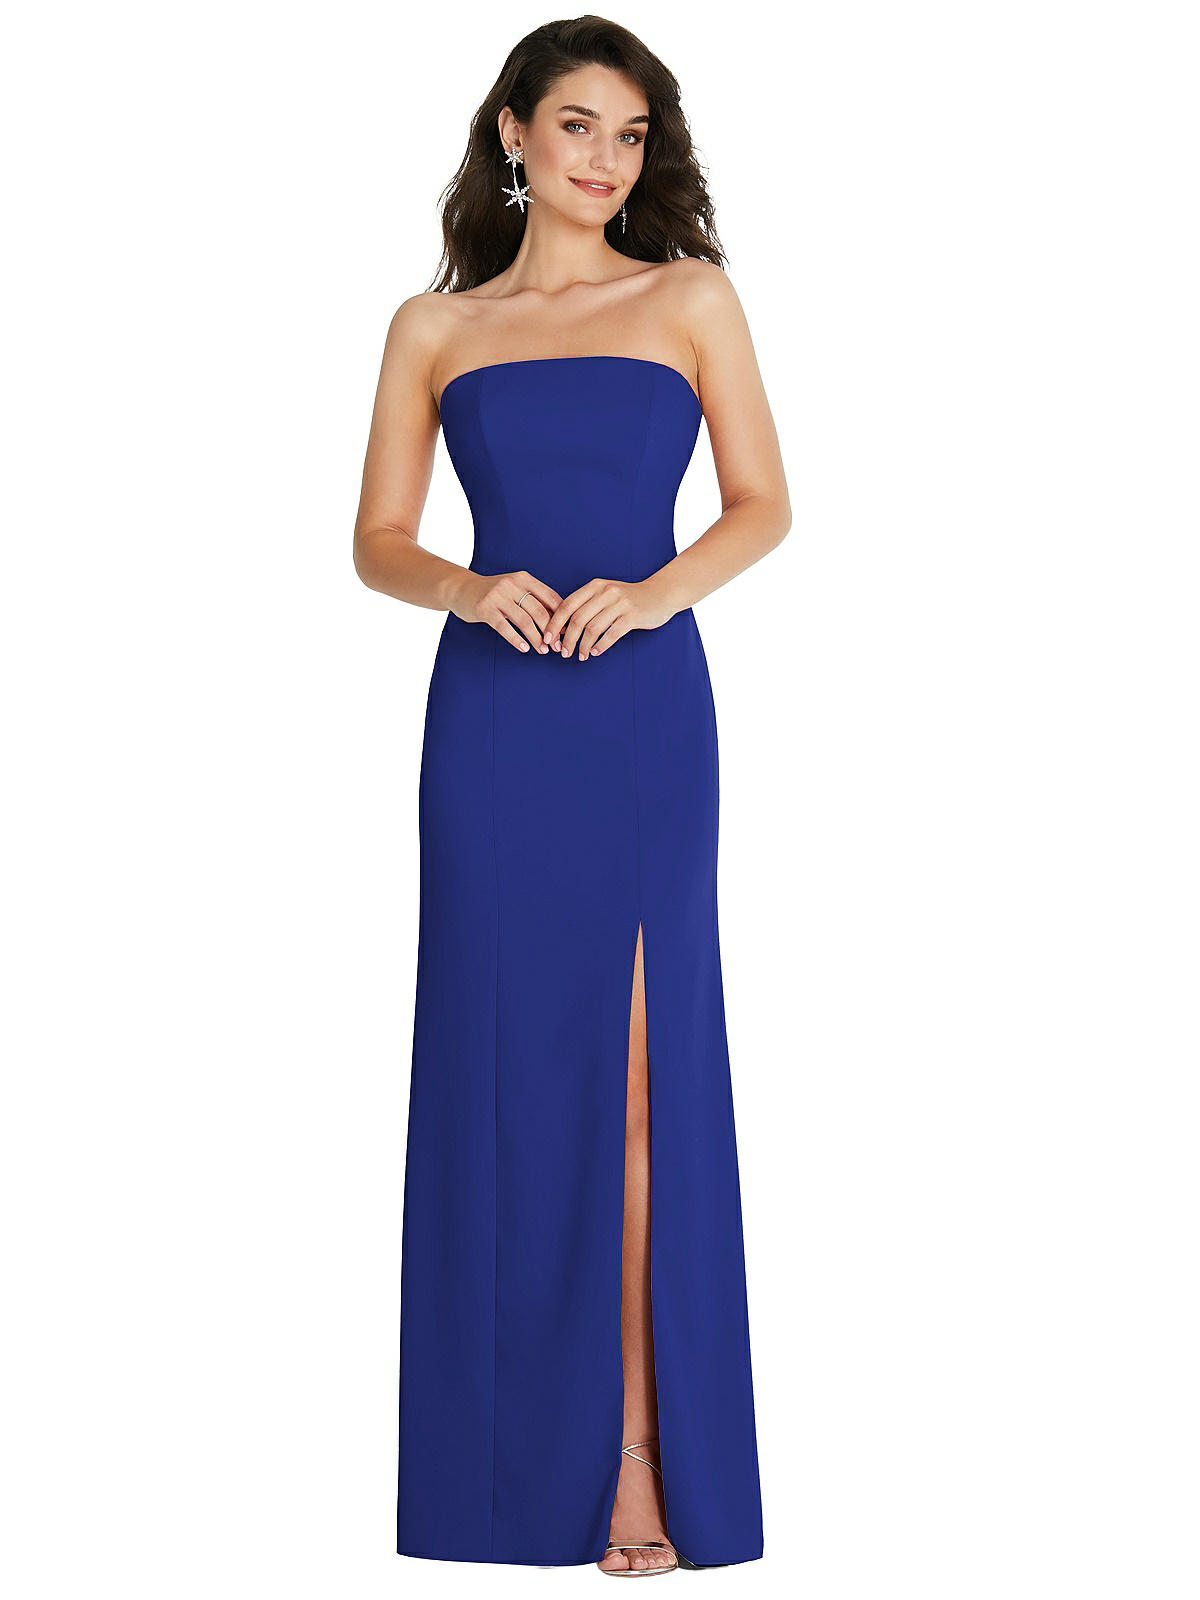 Deb Dresses Online - The customer would like to add halter strap instead of  the strapless neckline. According to her specifications, we custom make the  dress from pattern to finish today. Please